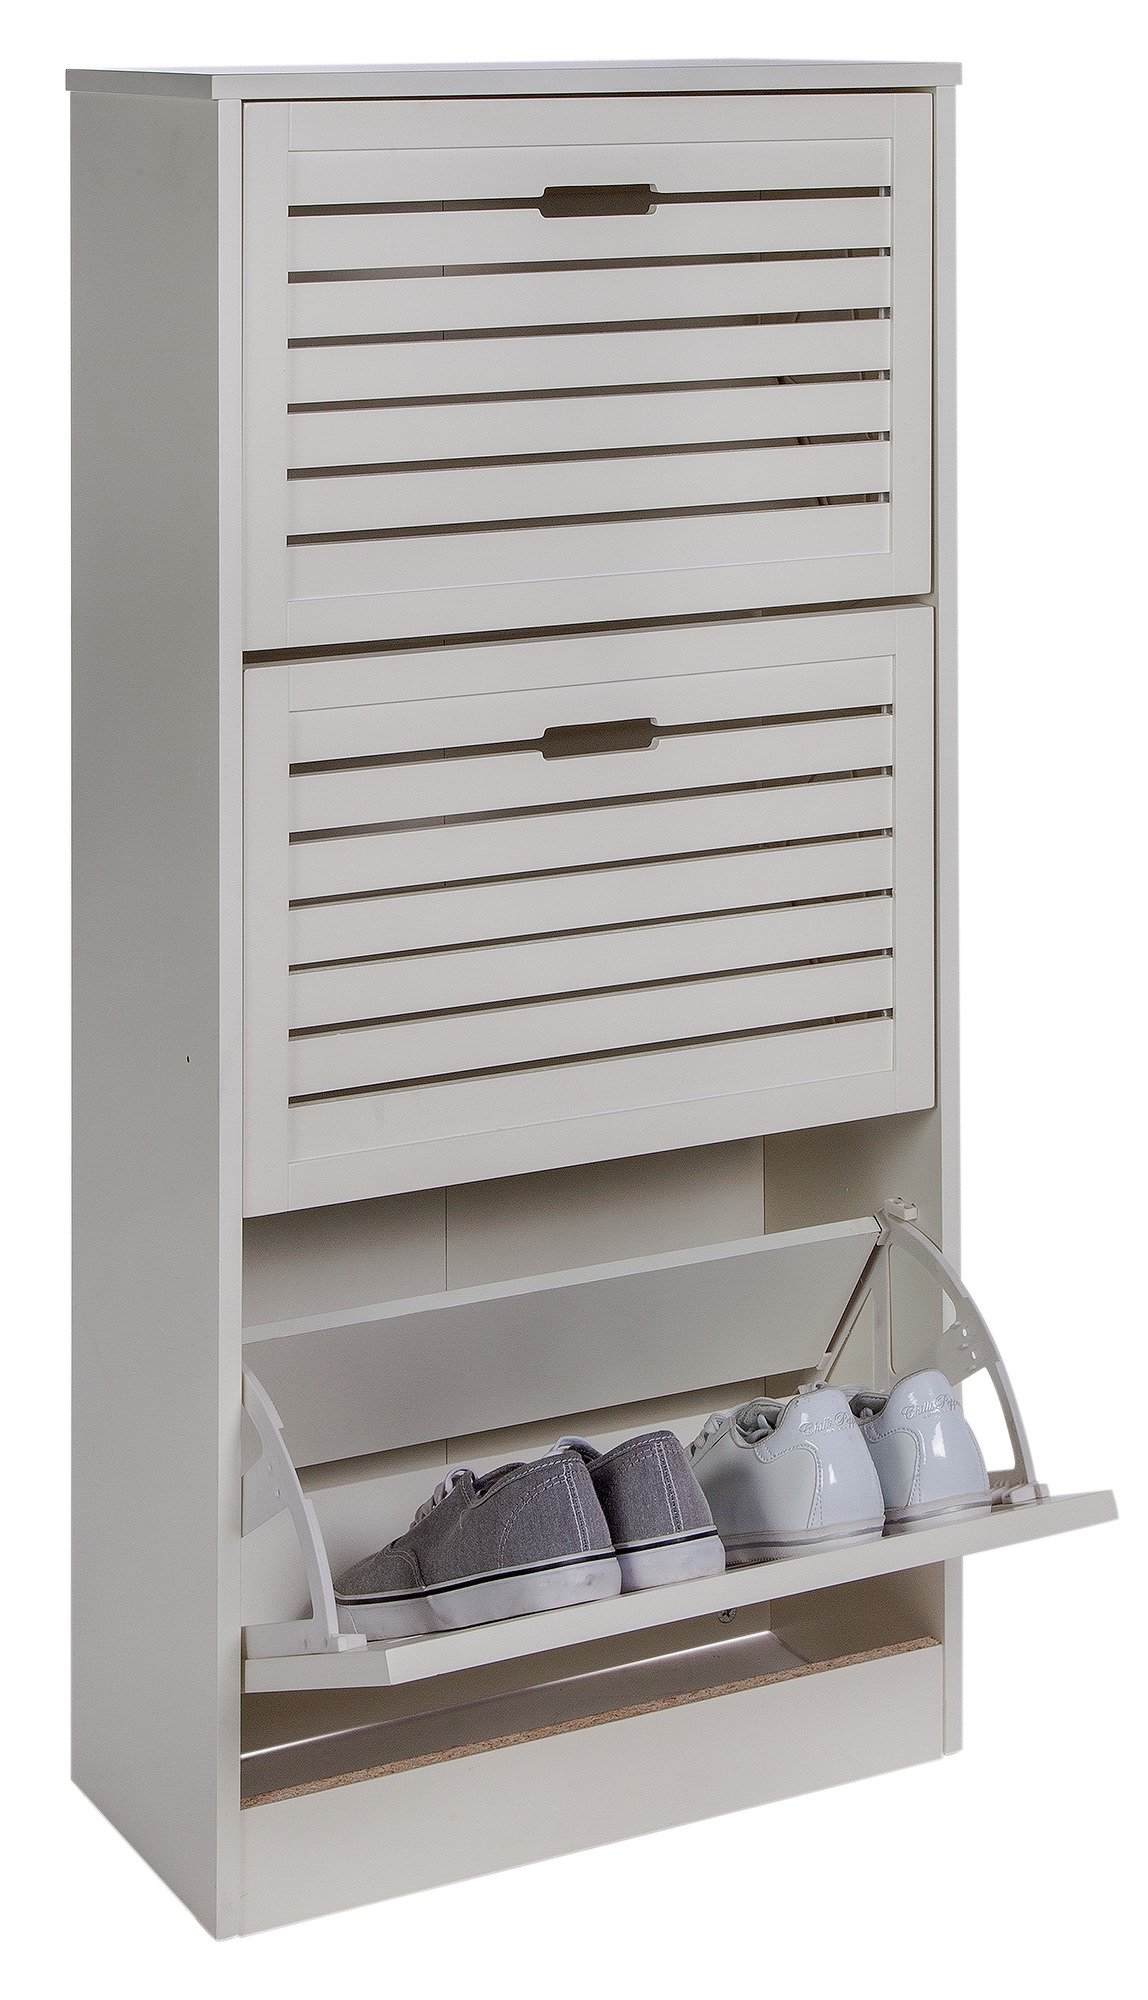 buy home hereford shoe storage cabinet - white at argos.co.uk